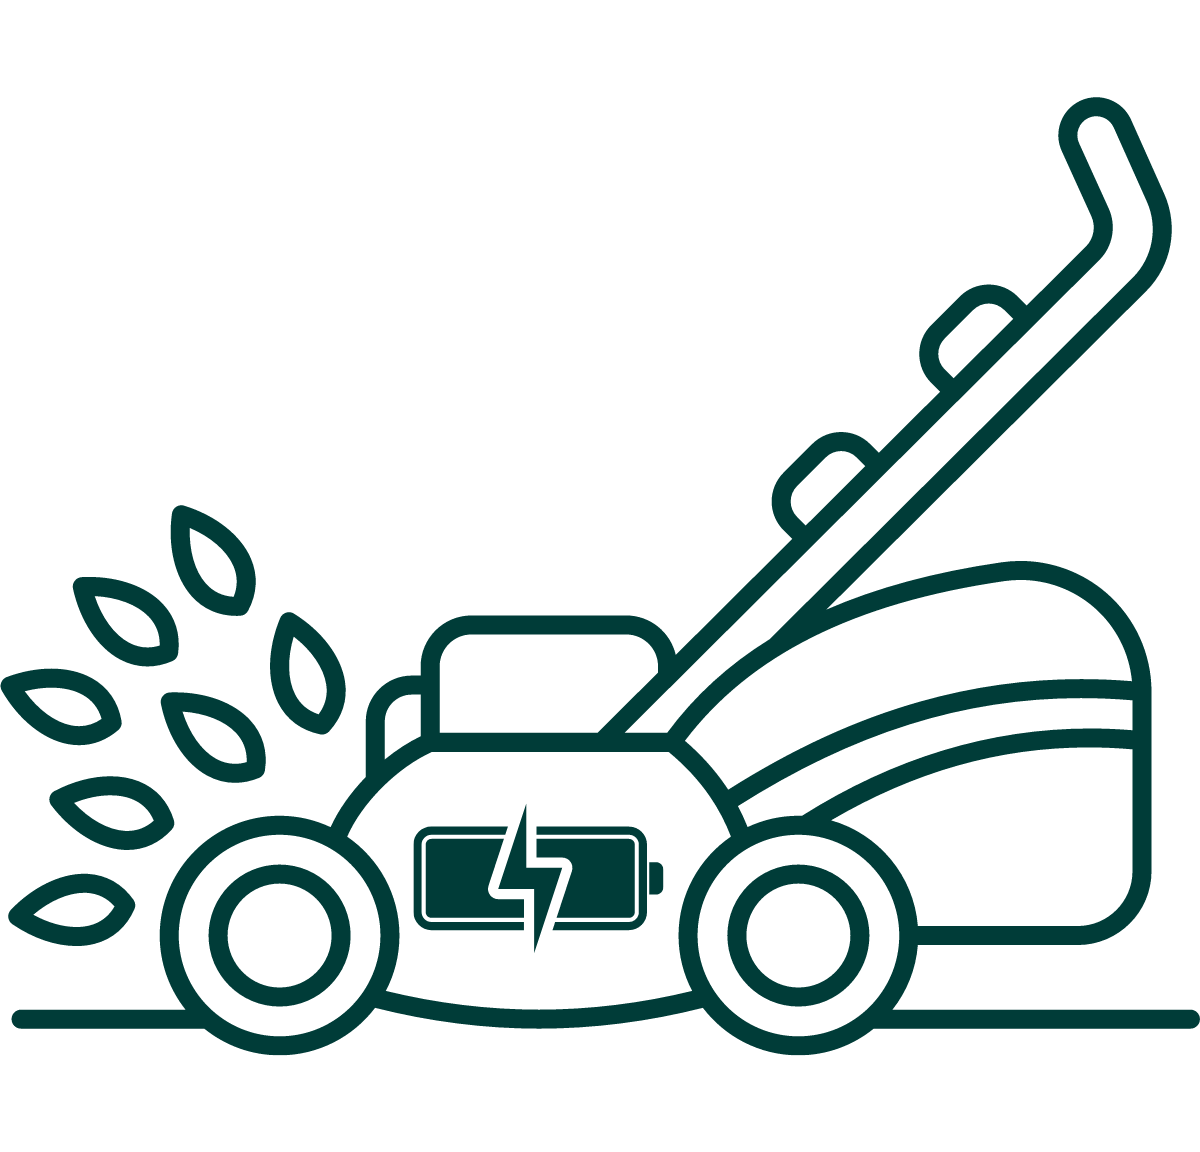 Graphic icon of a green lawnmower with an electric battery symbol on it.